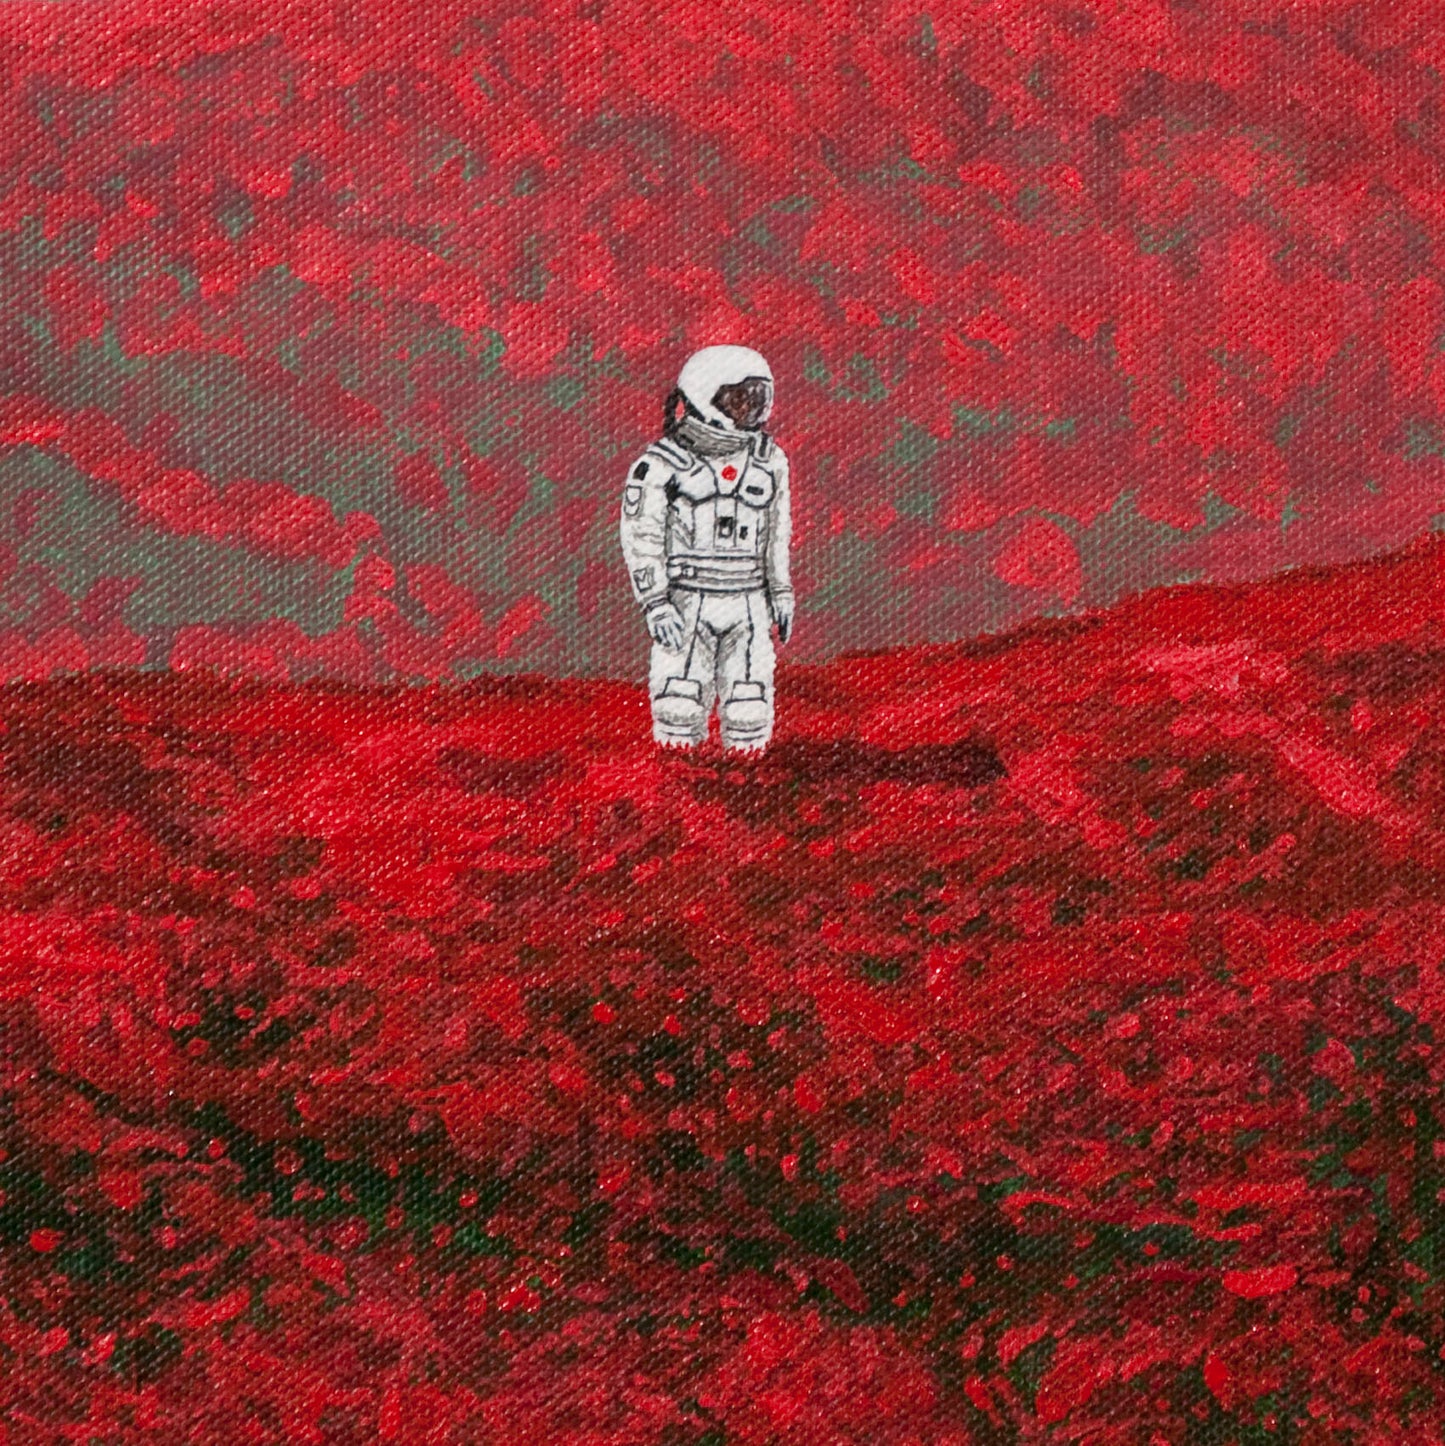 Original semiabstract landscape painting of red fields with an astronaut in white space suit, zoomed in detail.